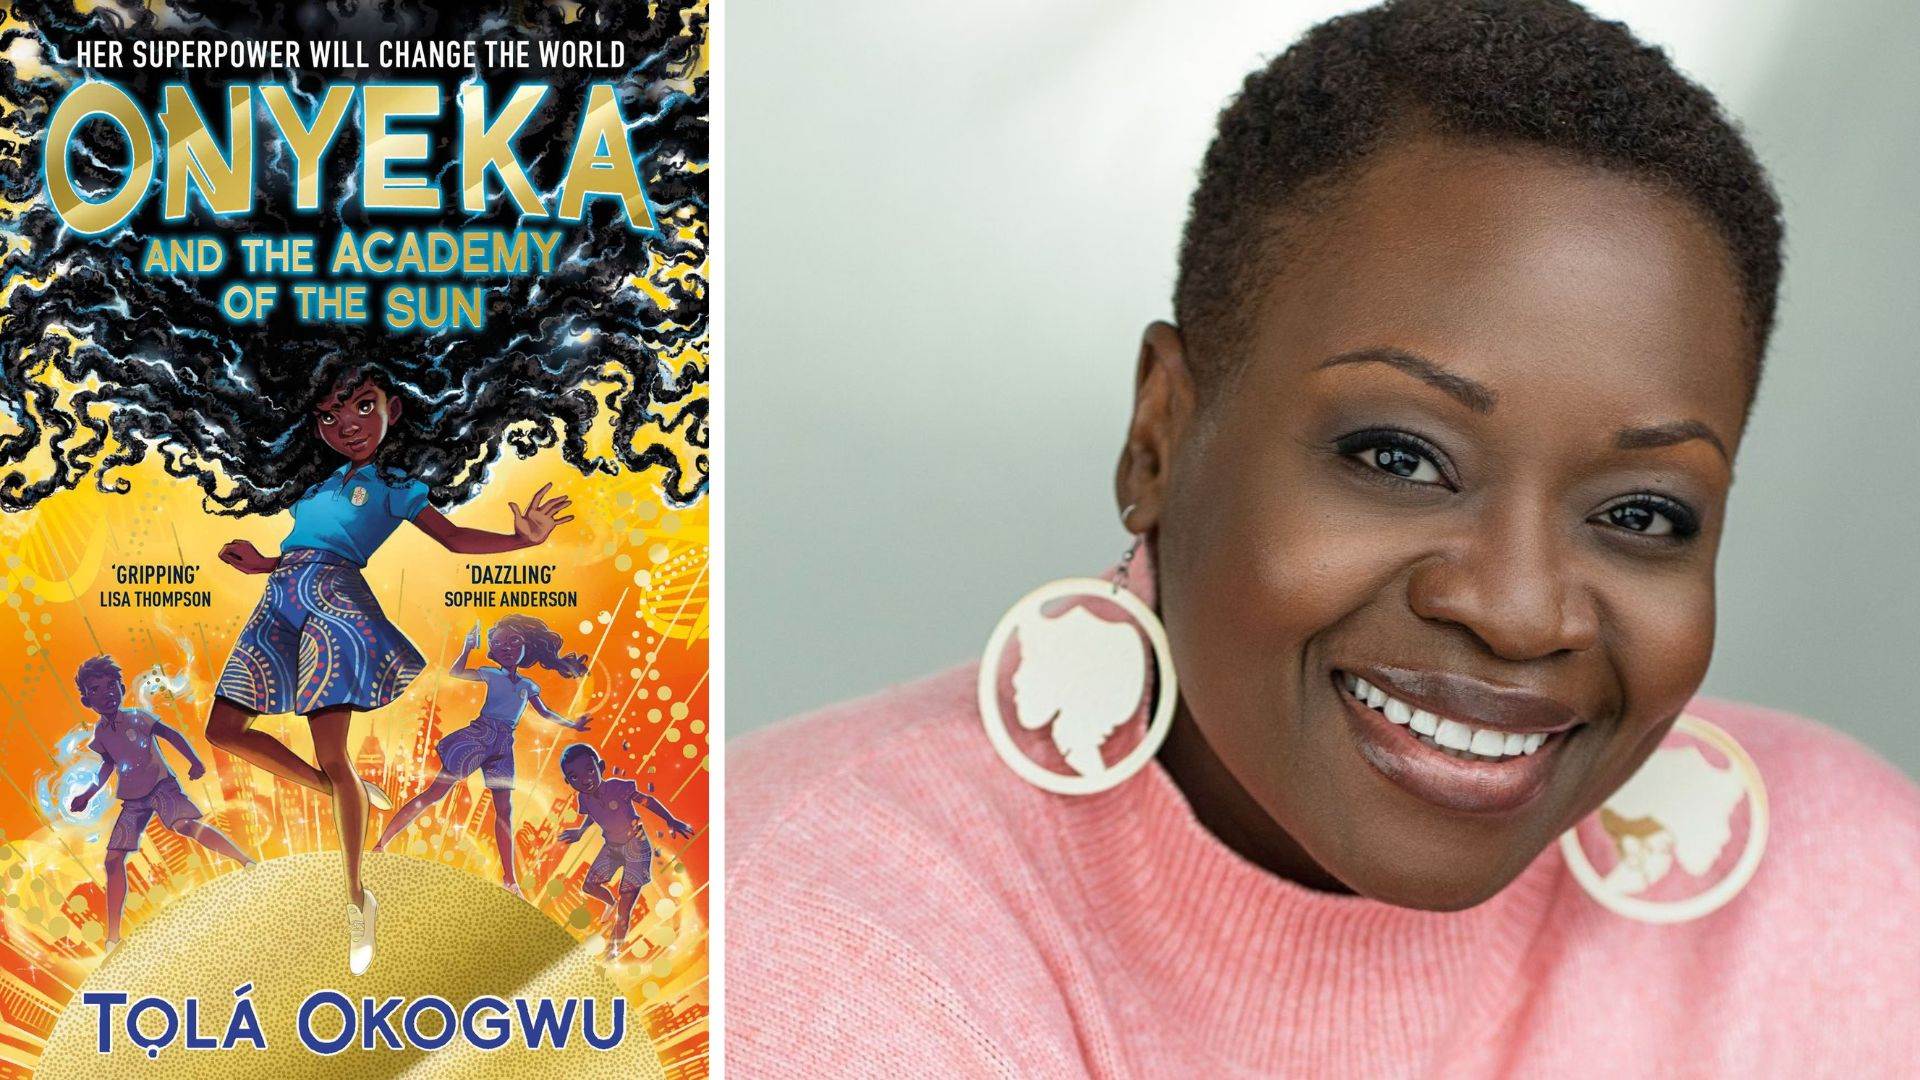 Tolá Okogwu and the cover of Onyeka and the Academy of the Sun